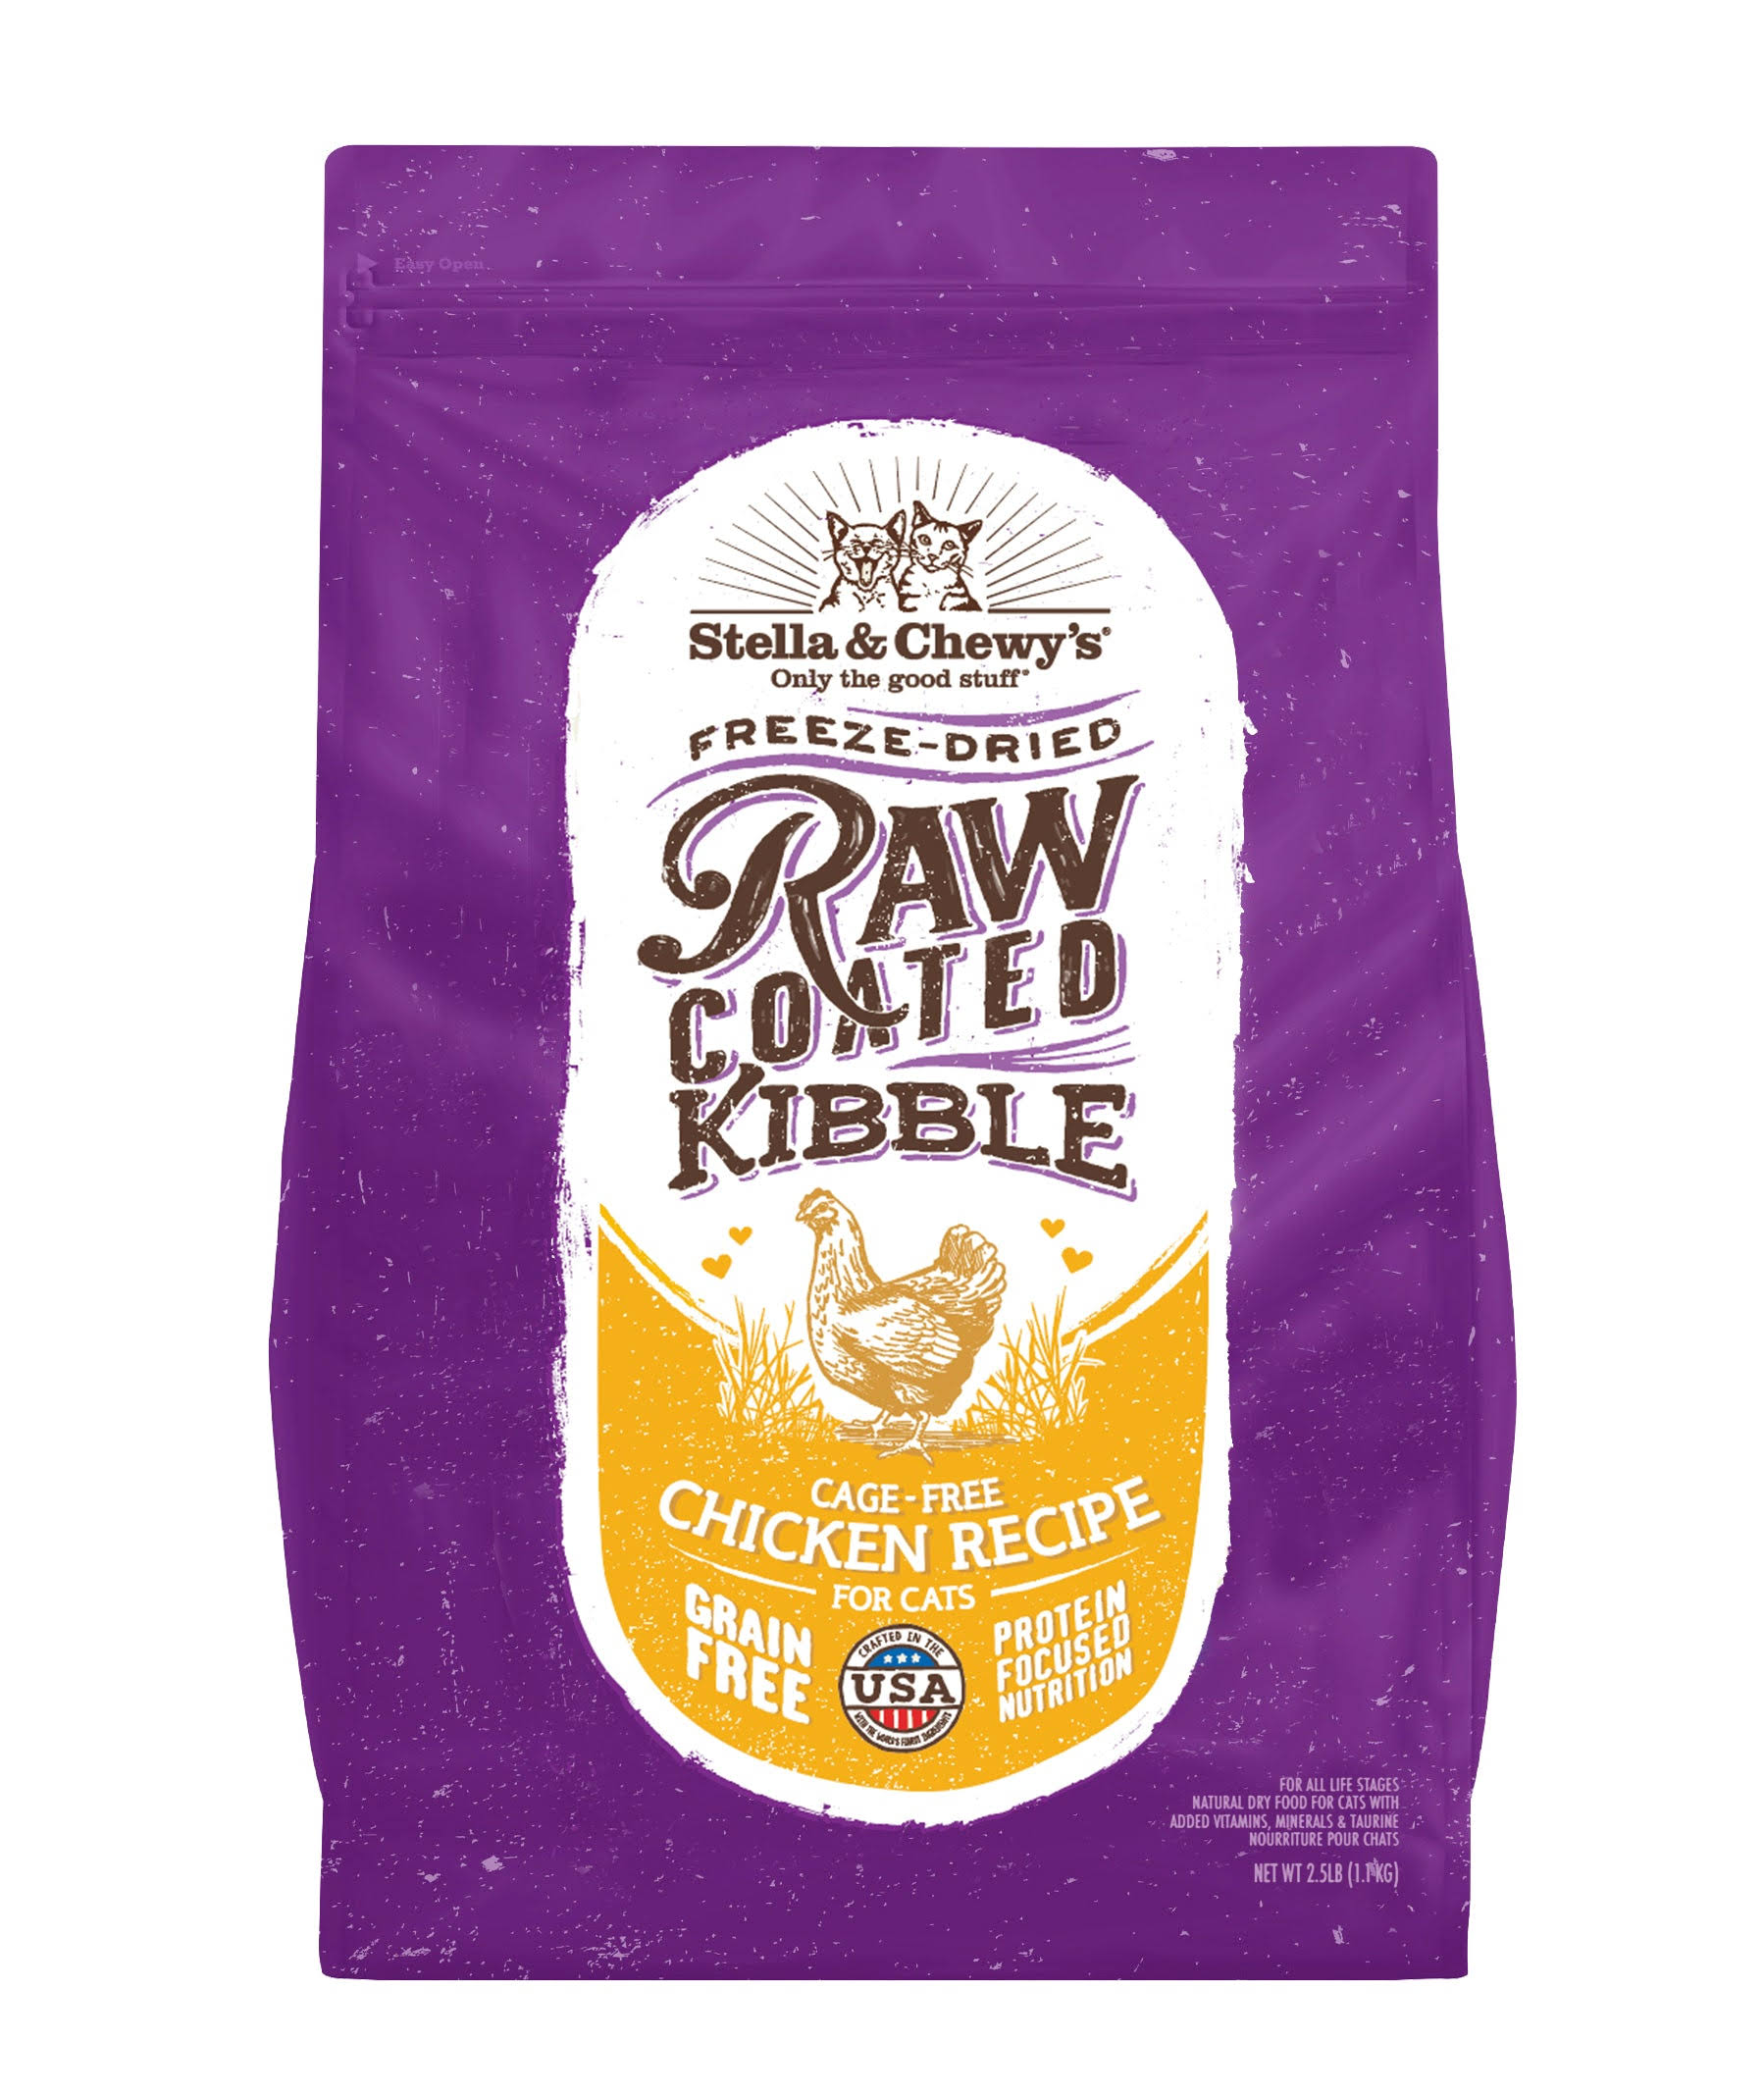 Stella & Chewy's Raw Coated Kibble Cage Free Chicken Recipe Dry Cat Food 5 lbs